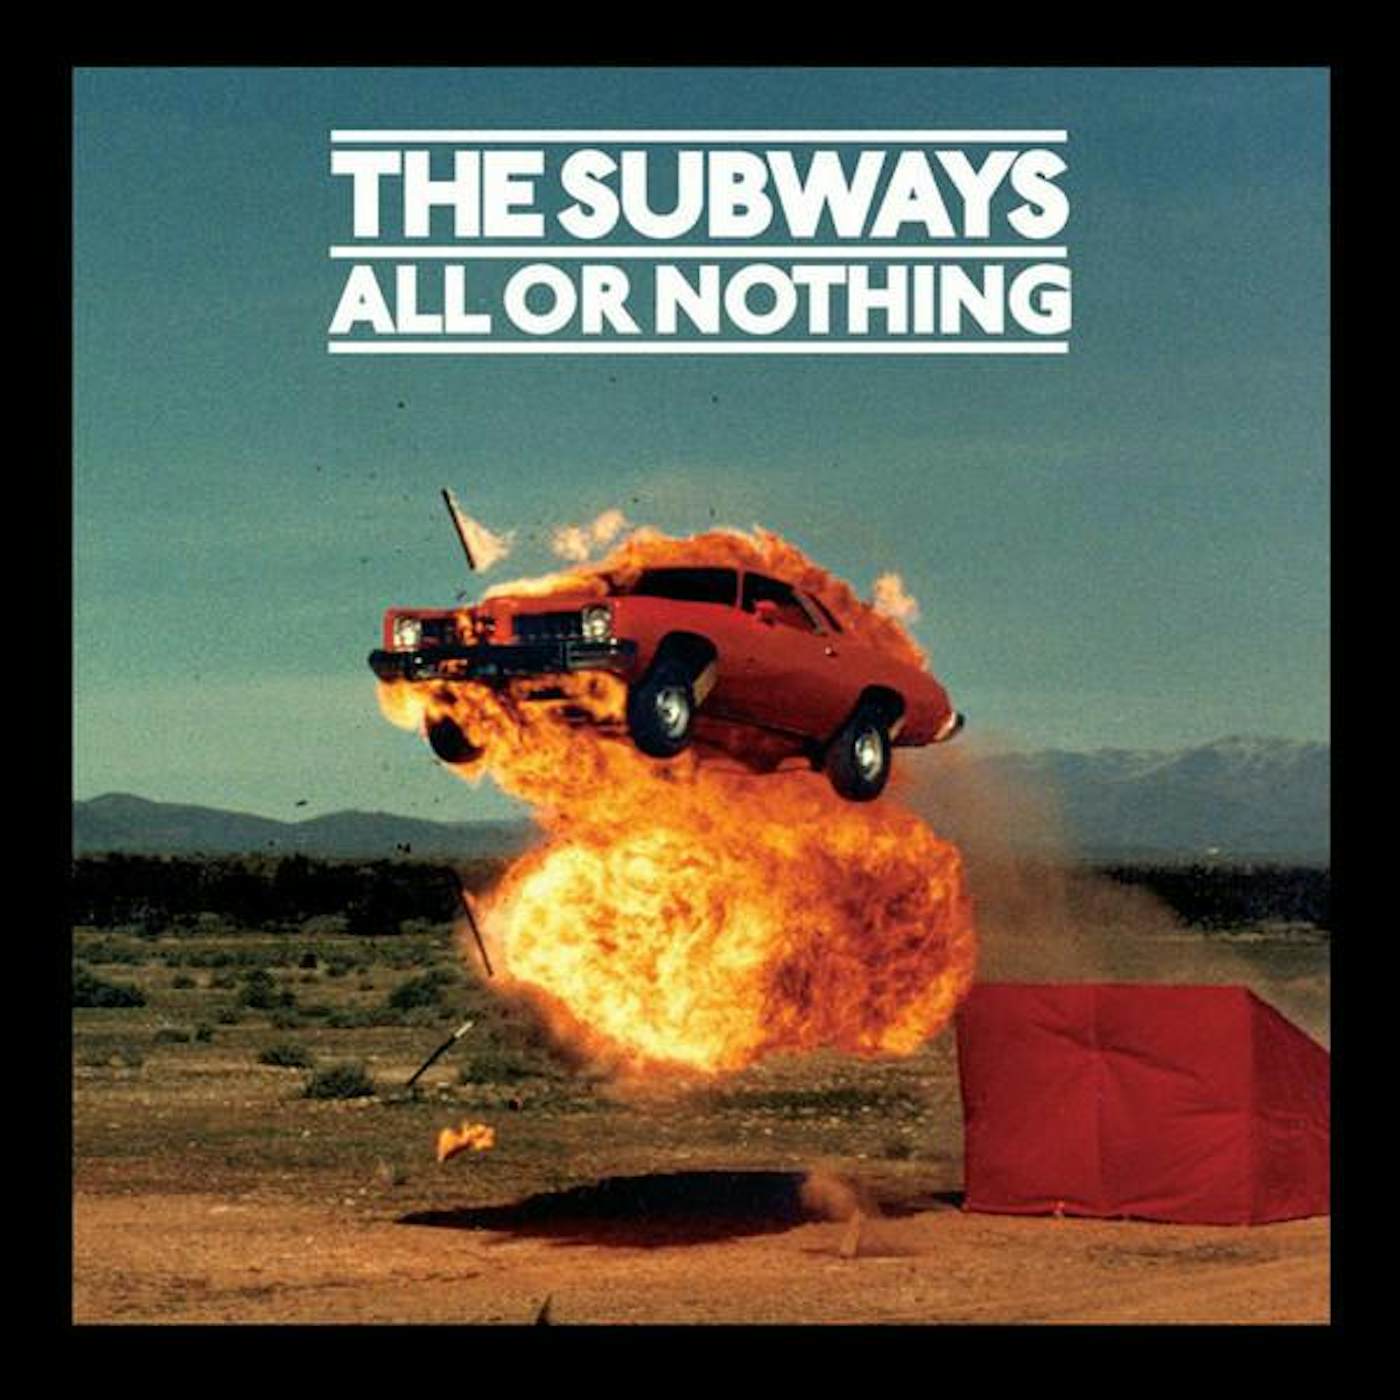 The Subways All or Nothing Vinyl Record